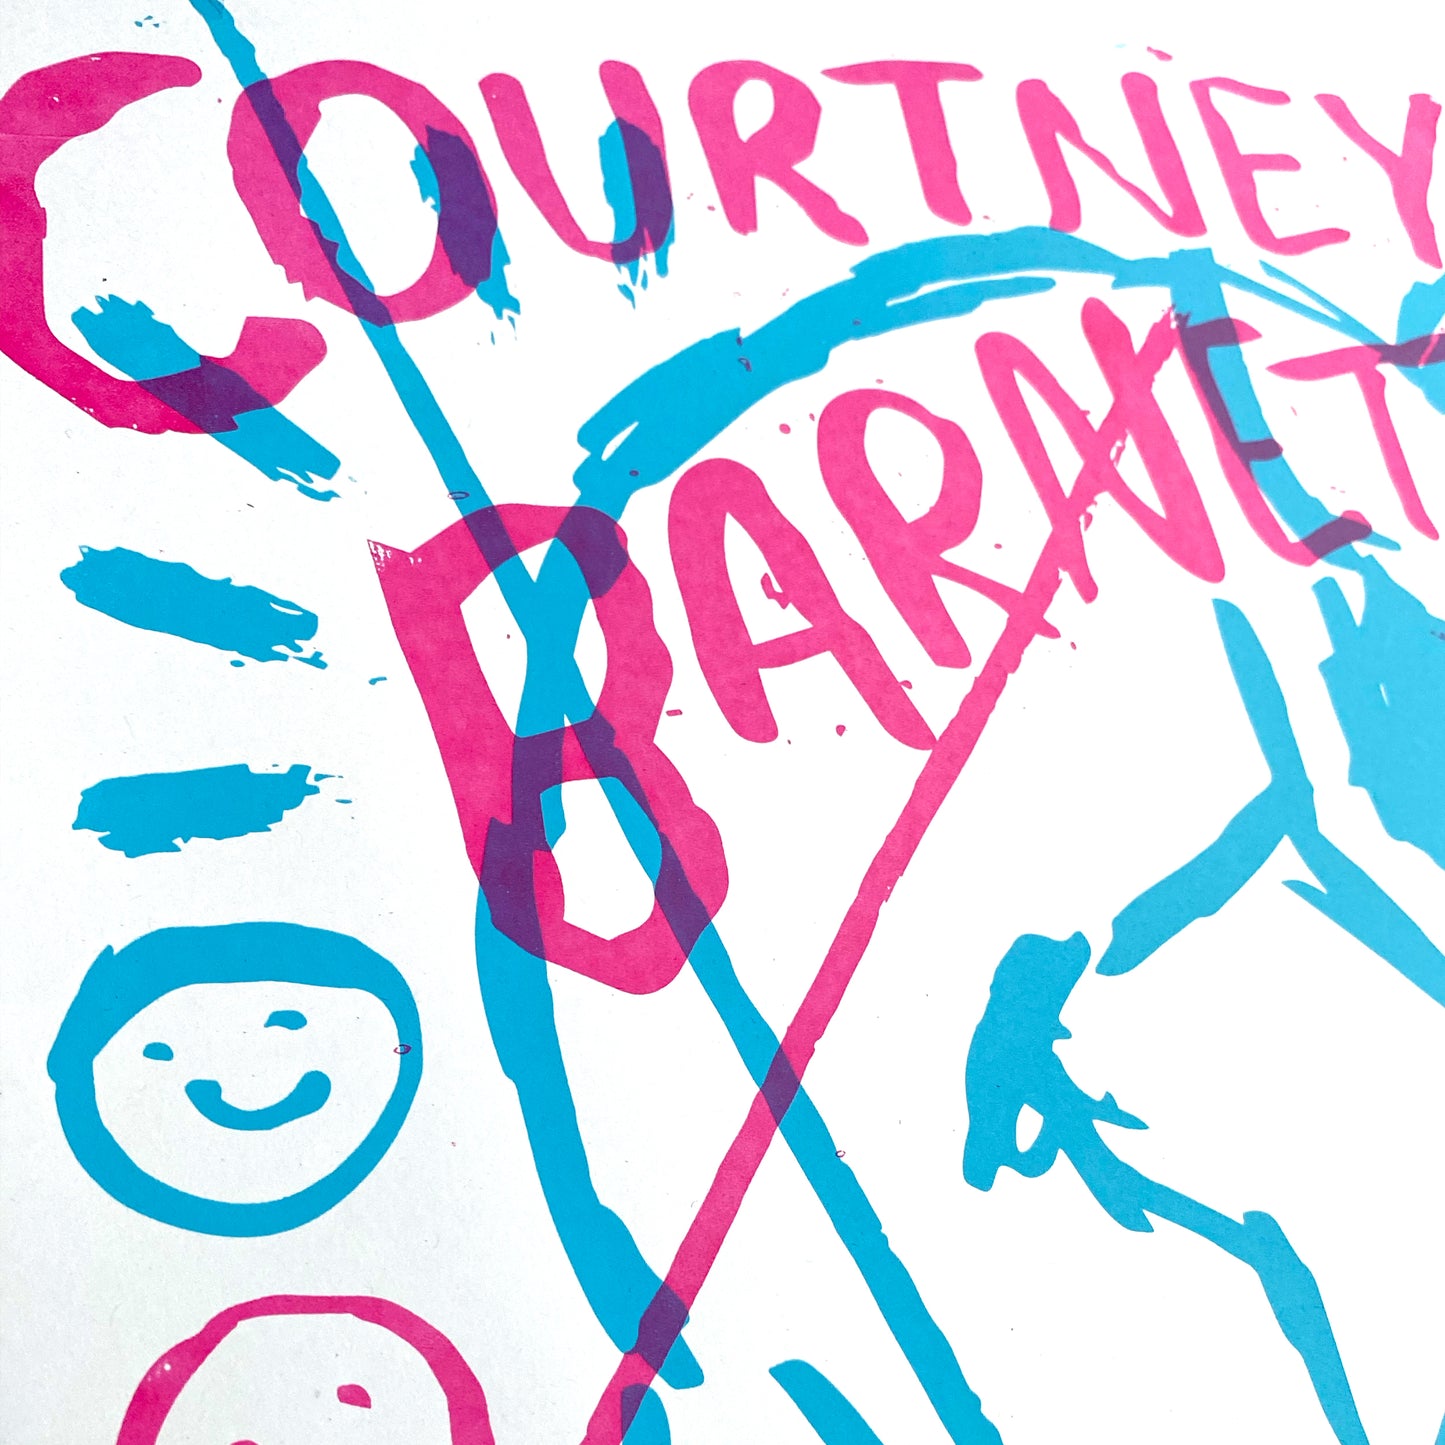 Courtney Barnett - Invisible Wind Factory 2022